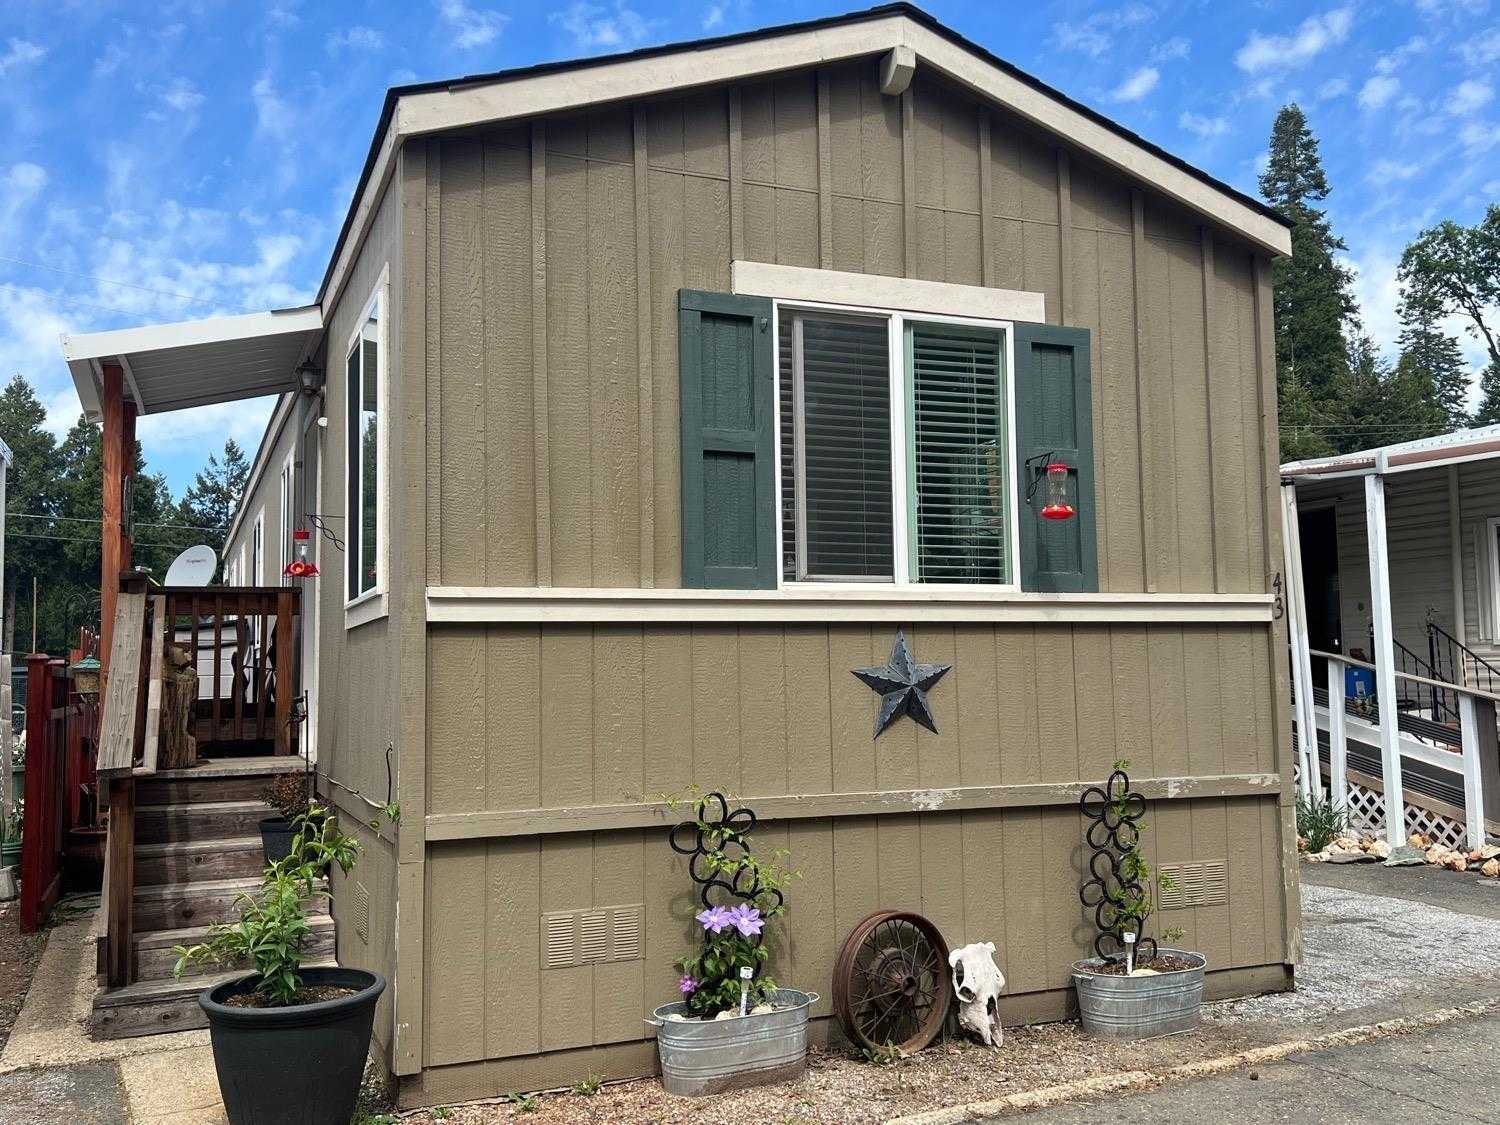 $94,750 - 2Br/2Ba -  for Sale in Pollock Pines